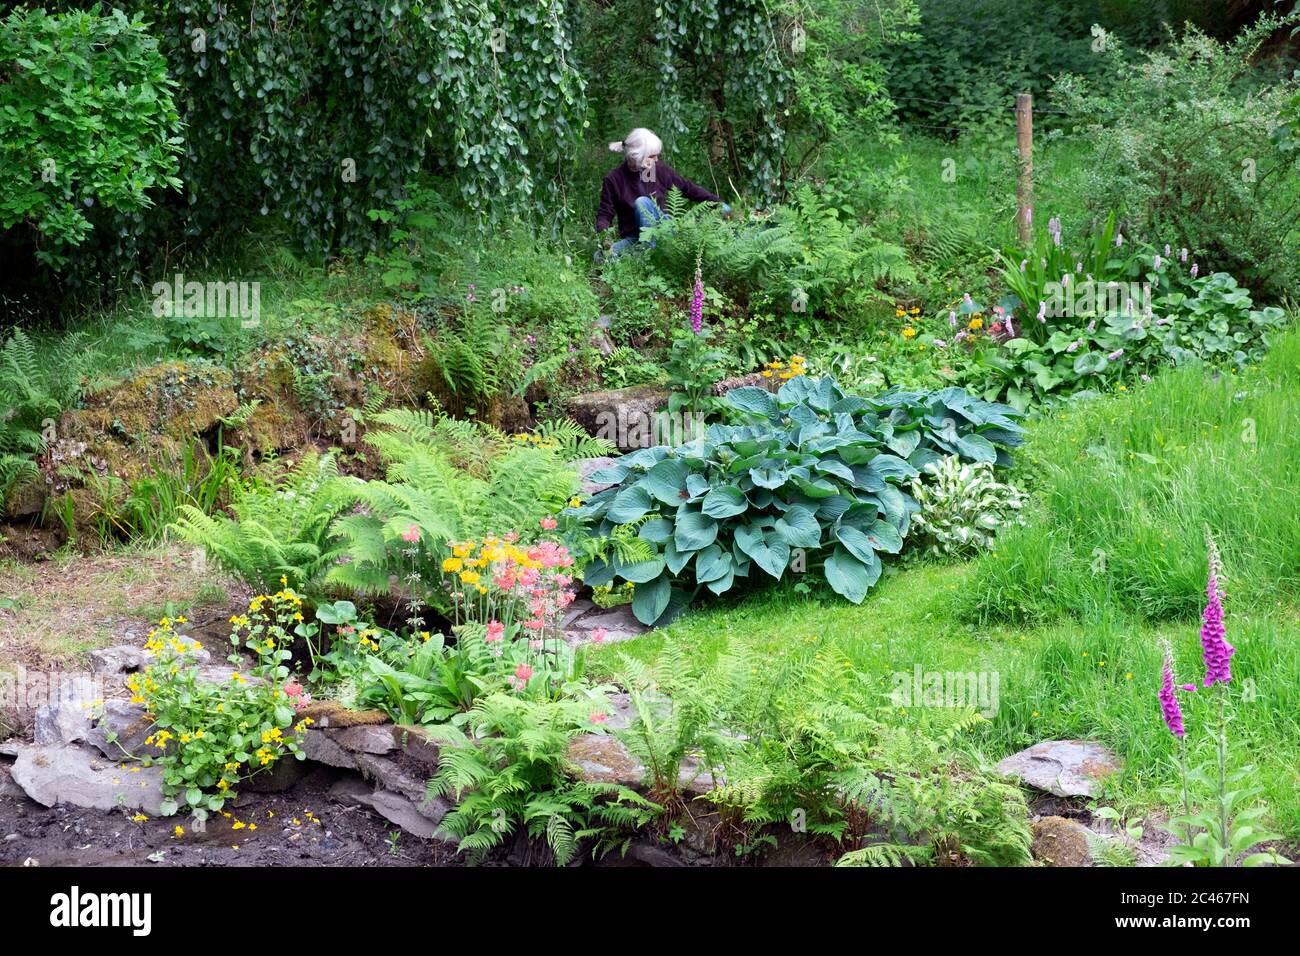 View of woman weeding Hostas, candelabra, foxgloves, ferns, growing in a shady damp area of a country garden in Carmarthenshire Wales UK. KATHY DEWITT Stock Photo